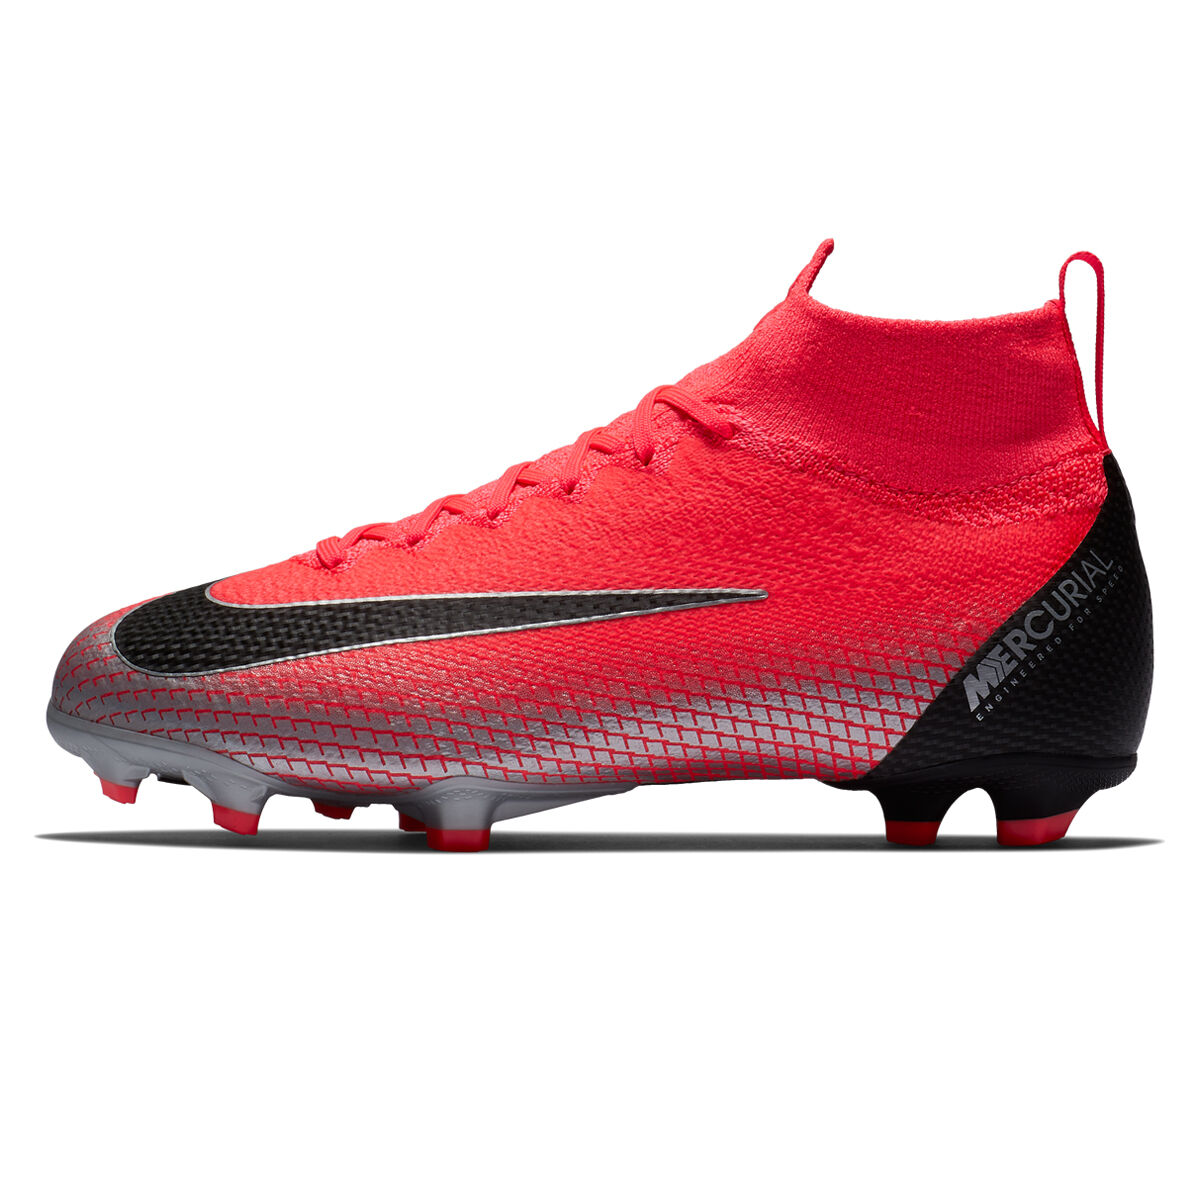 CR7 Boots. Nike SI